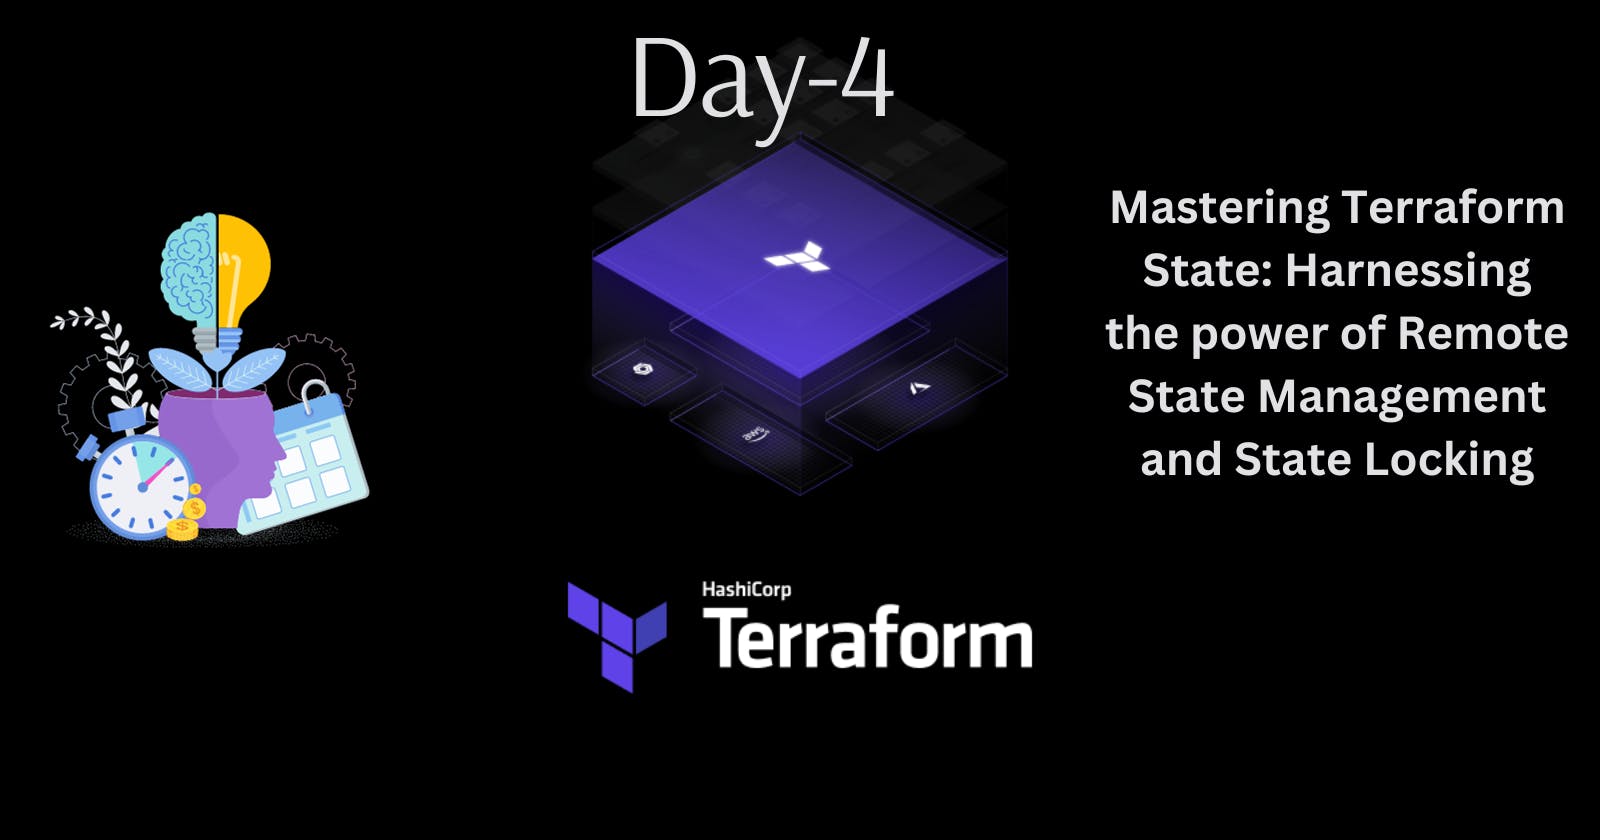 Mastering Terraform State: Harnessing the Power of Remote State Management and State Locking